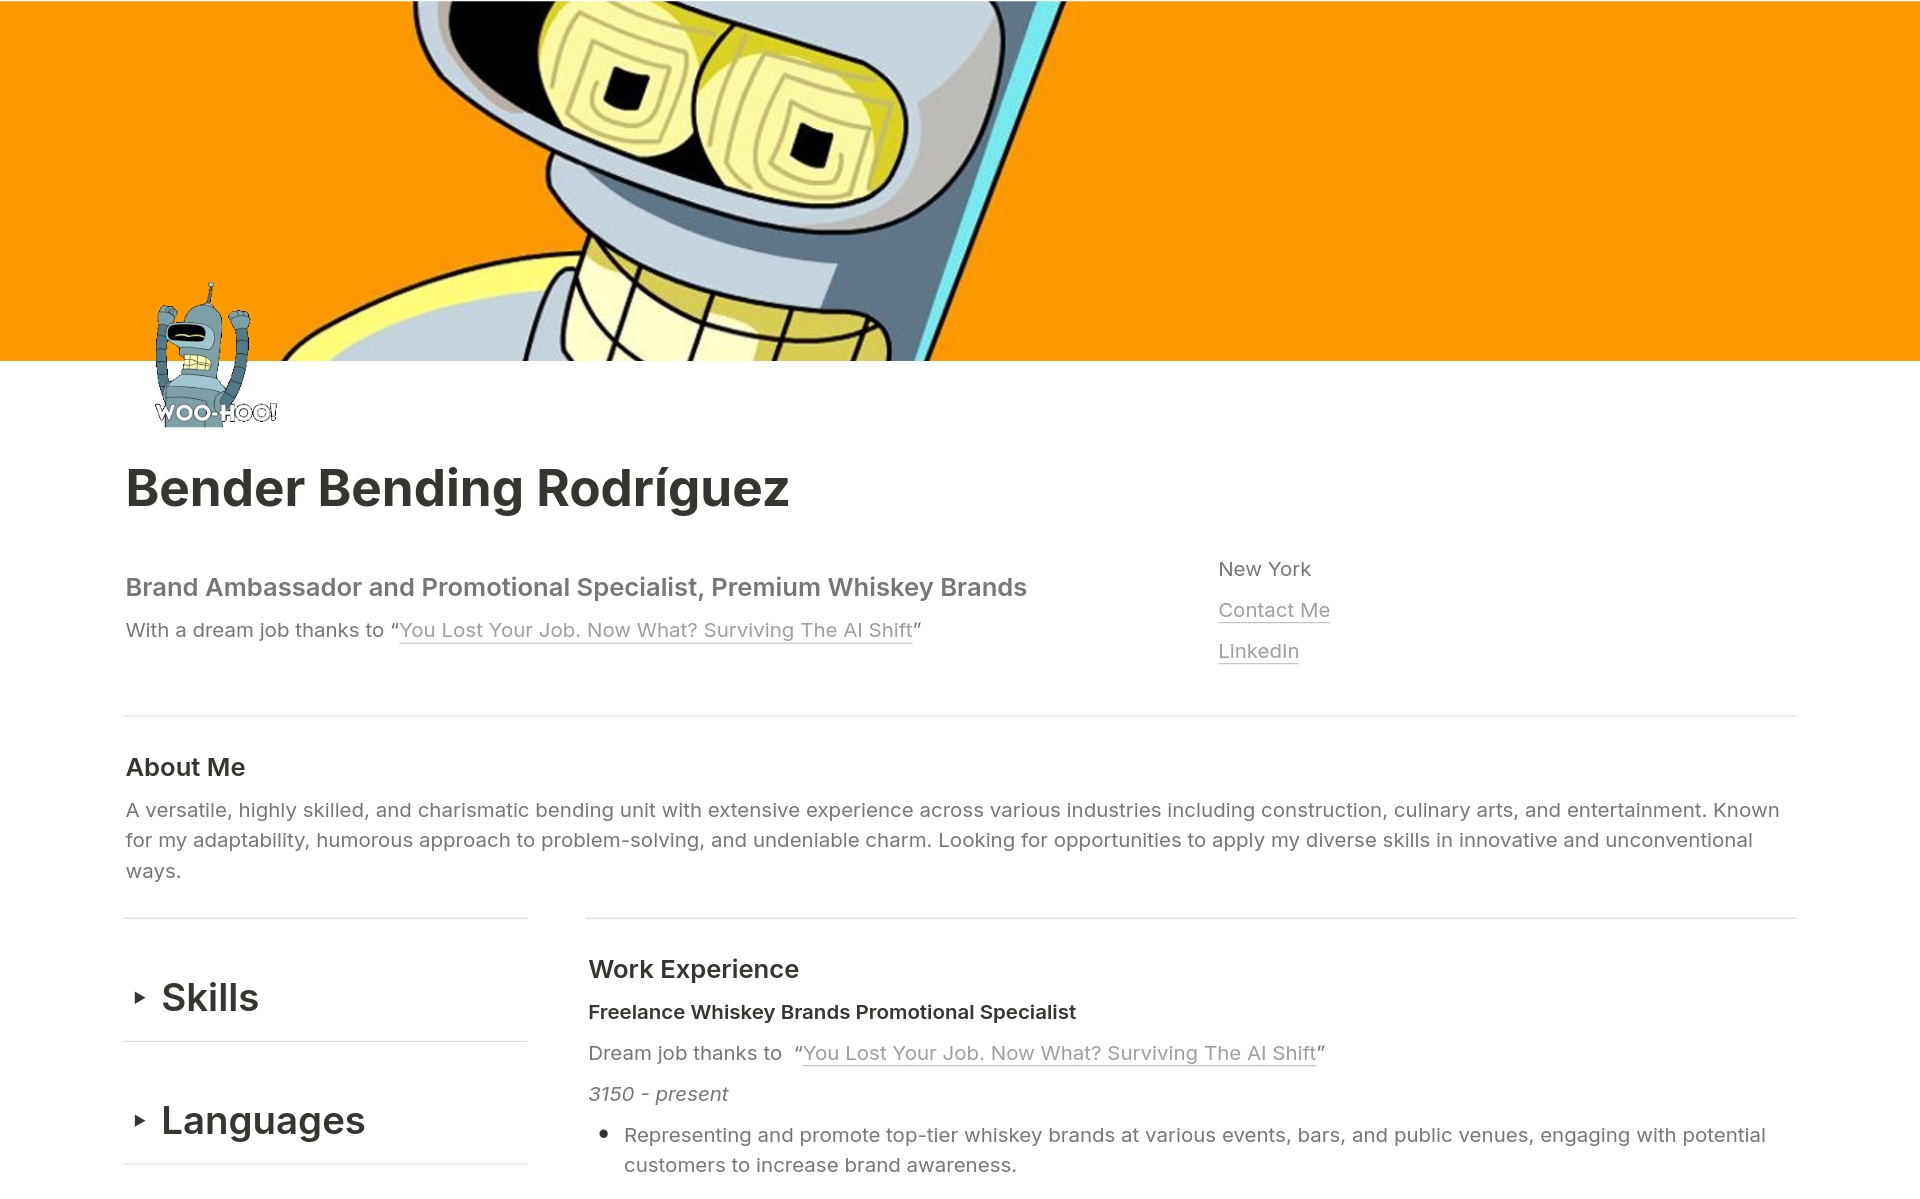 CV with AI prompts for inspiration to update your resume. Instead of using a "lorem ipsum" text, you'll find Bender's resume (from Futurama) for your amusement. Happy editing!